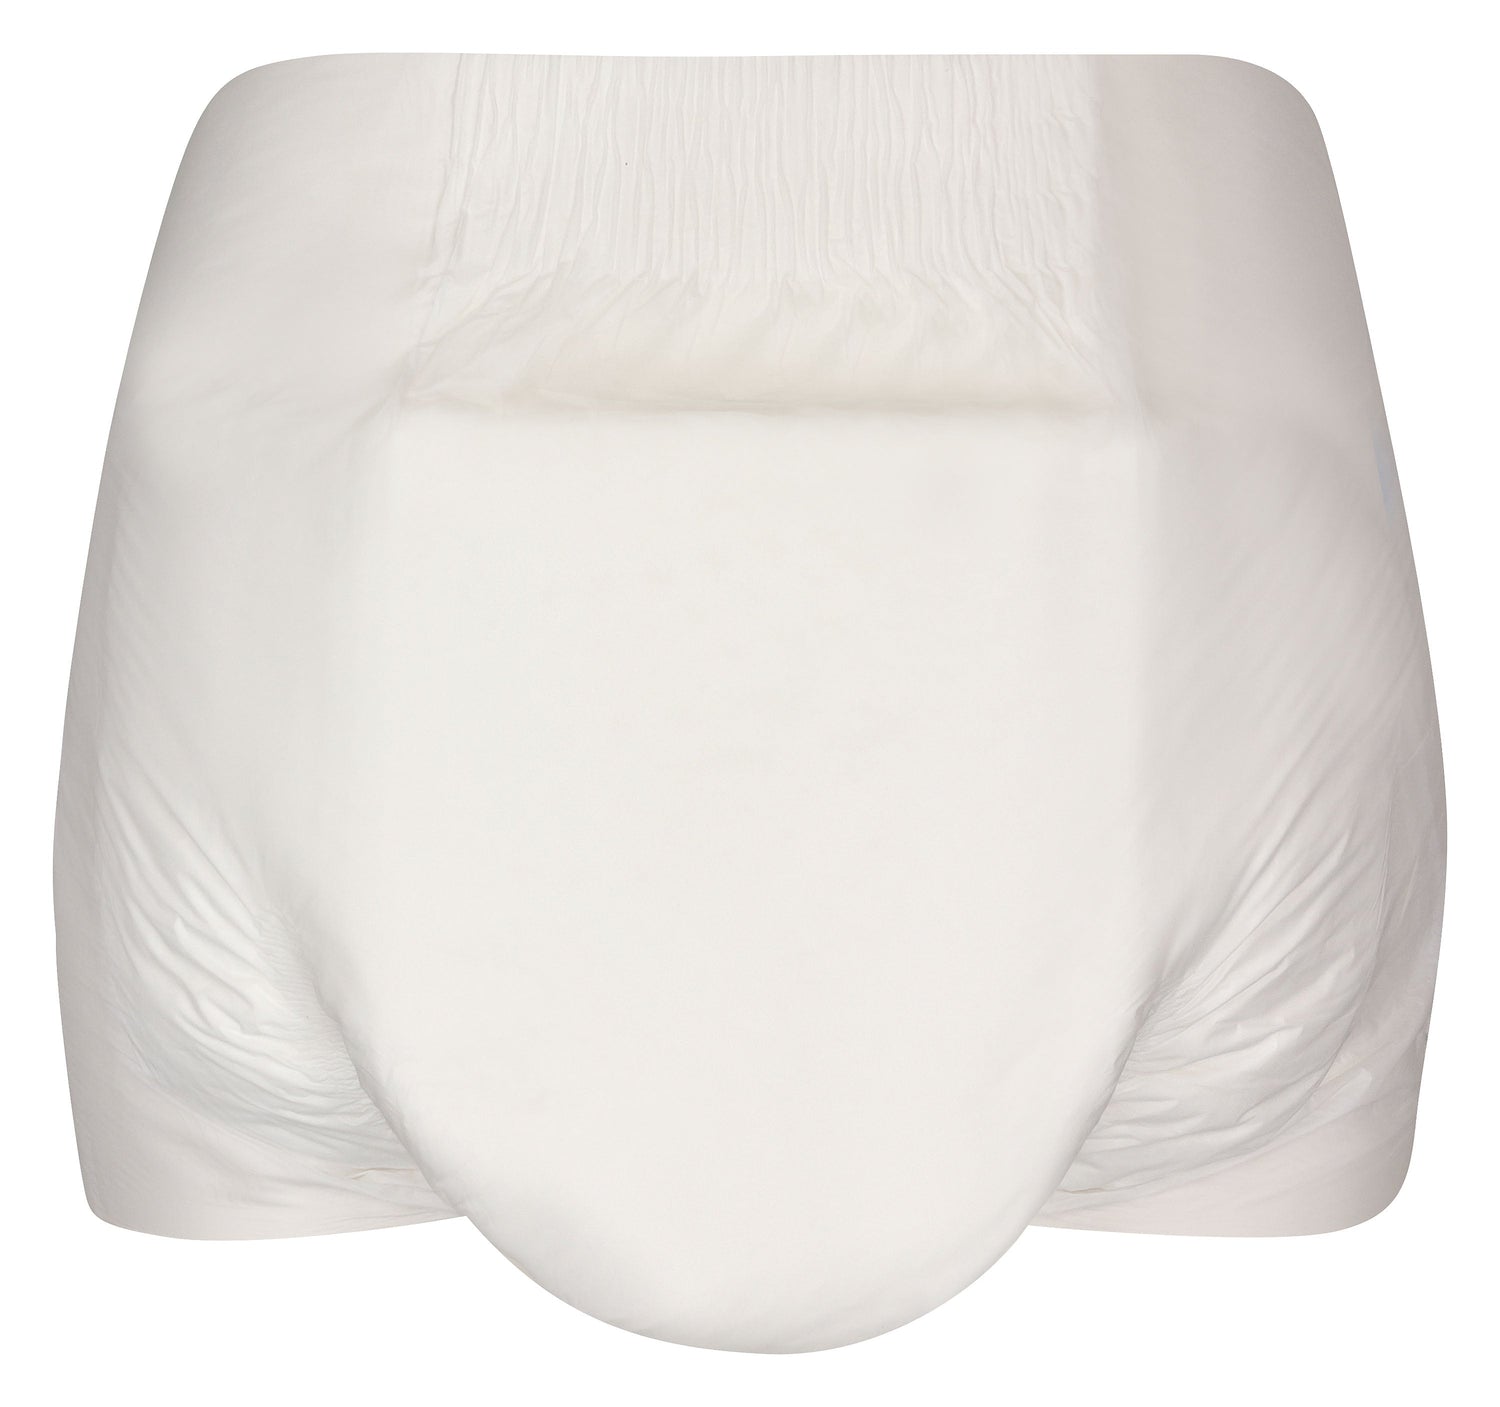  Refré Incontinence Pull-on Pants Maximum, Large, 16